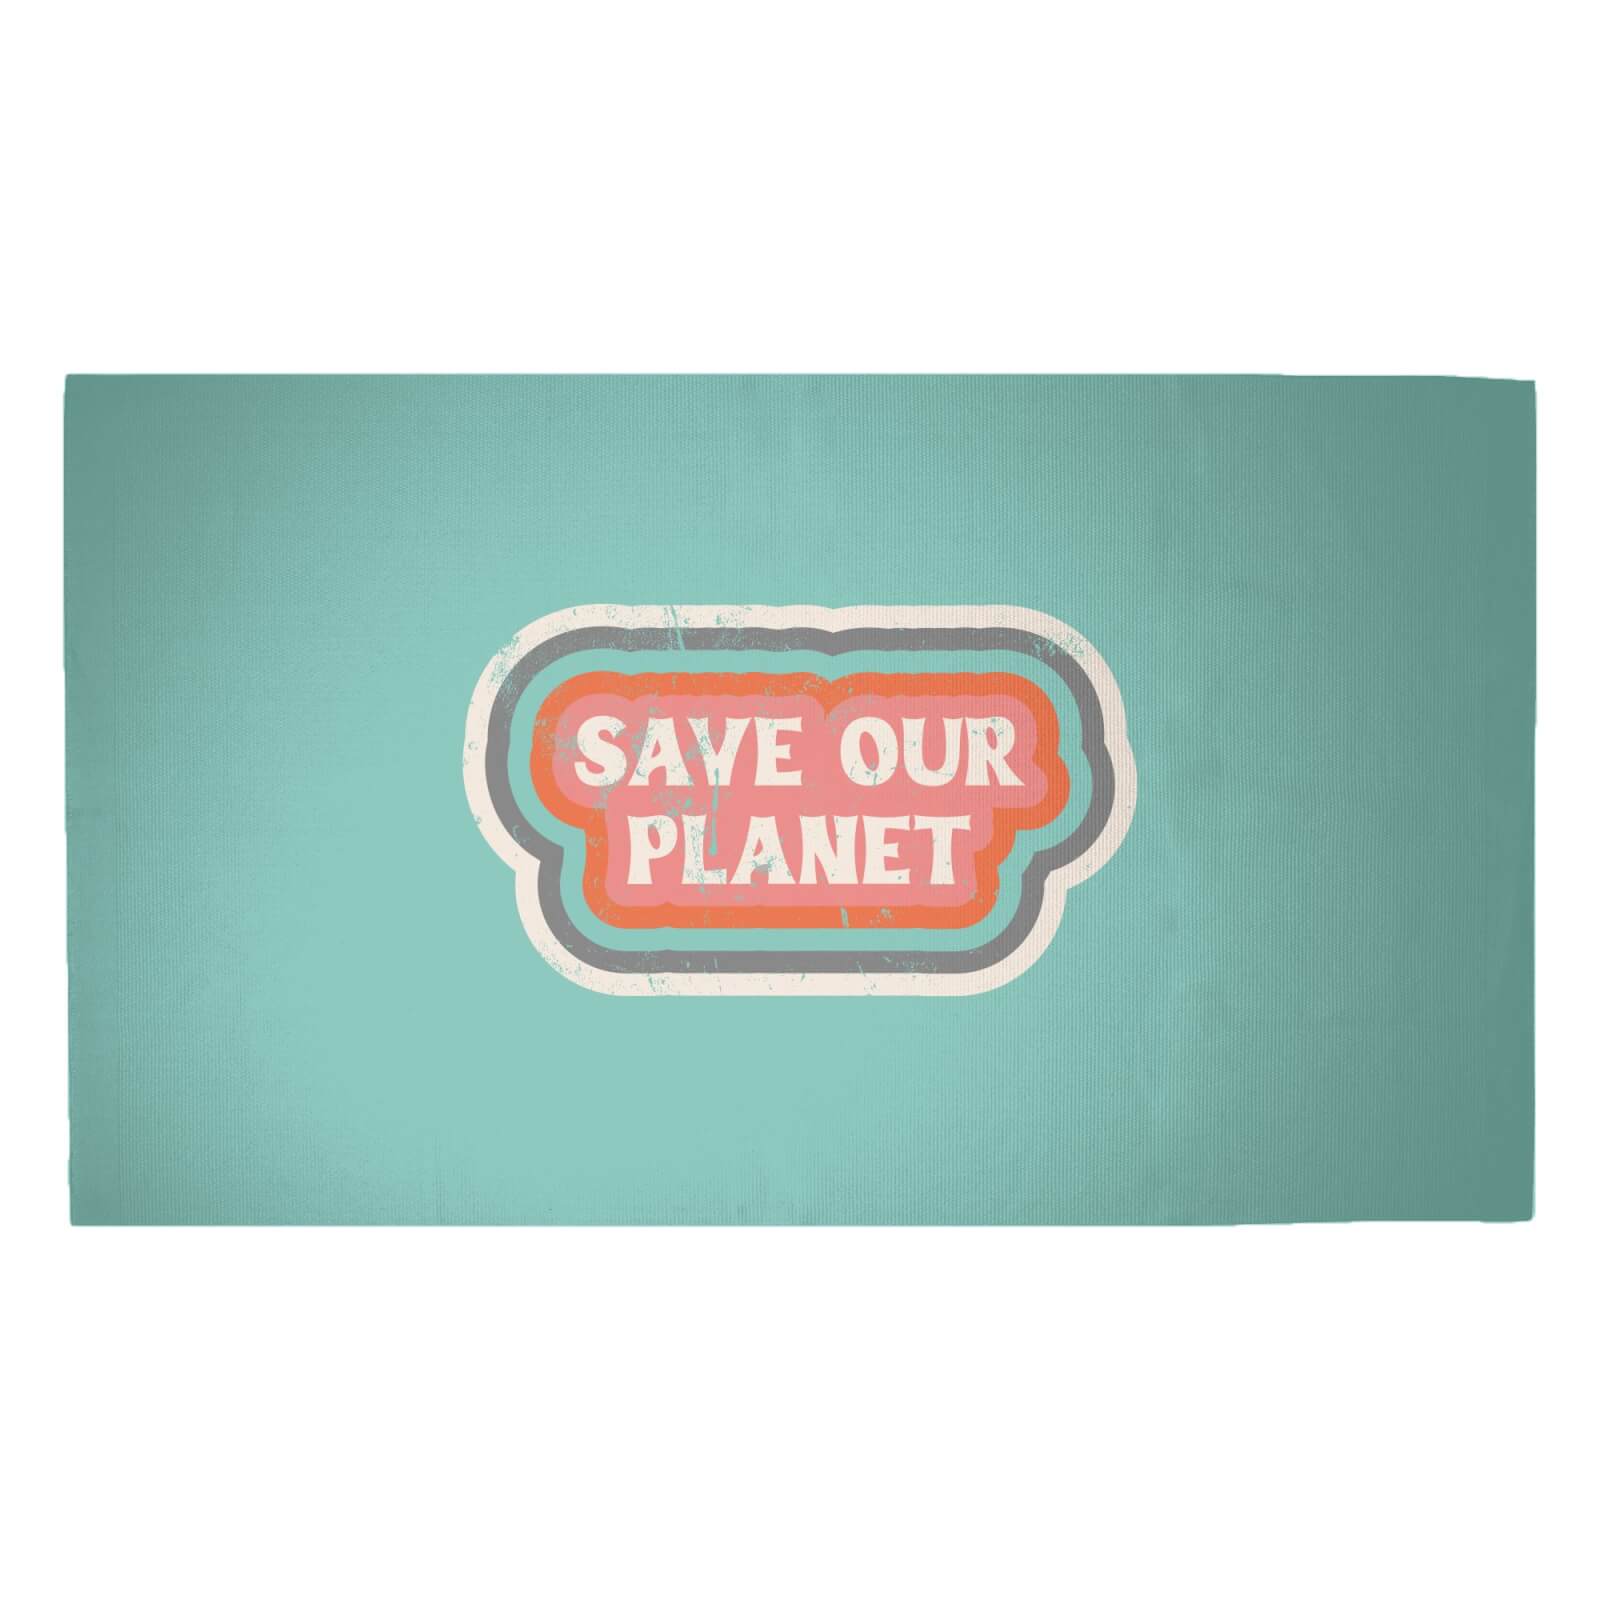 Save Our Planet Woven Rug - Medium